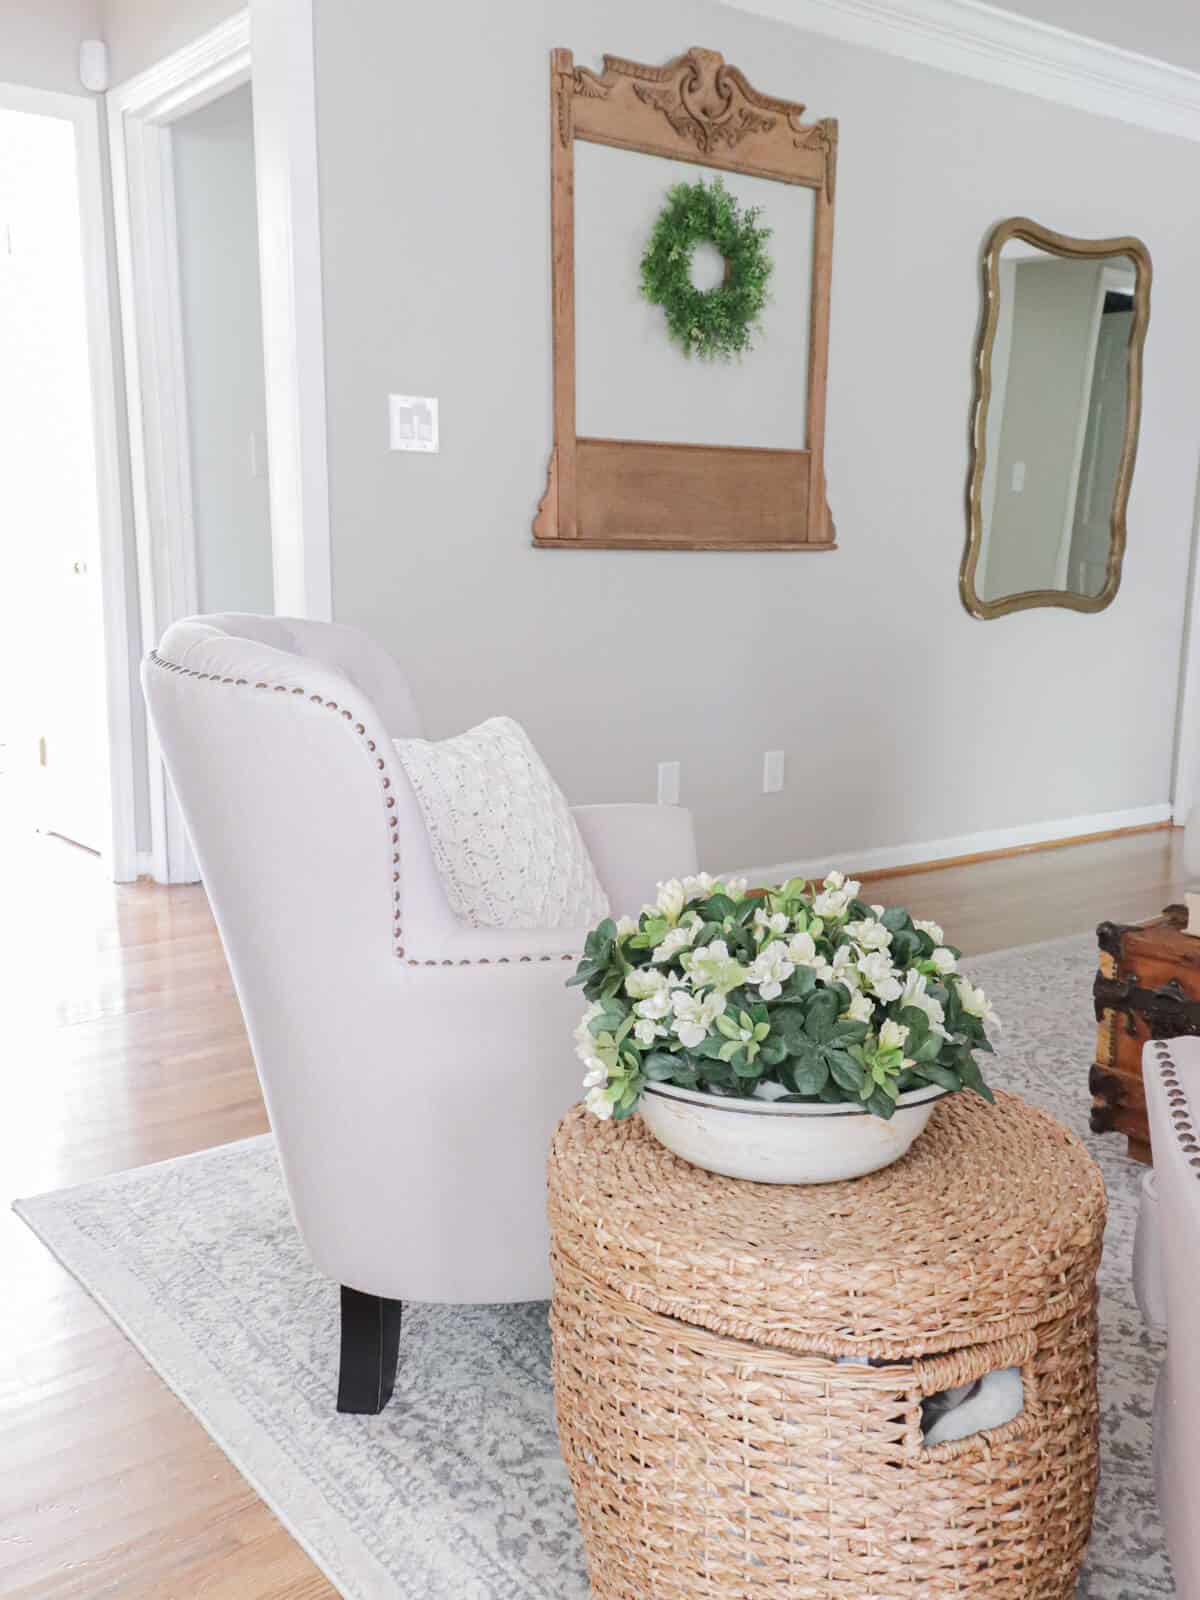 living room styled for summer with whites, wood grains and grays